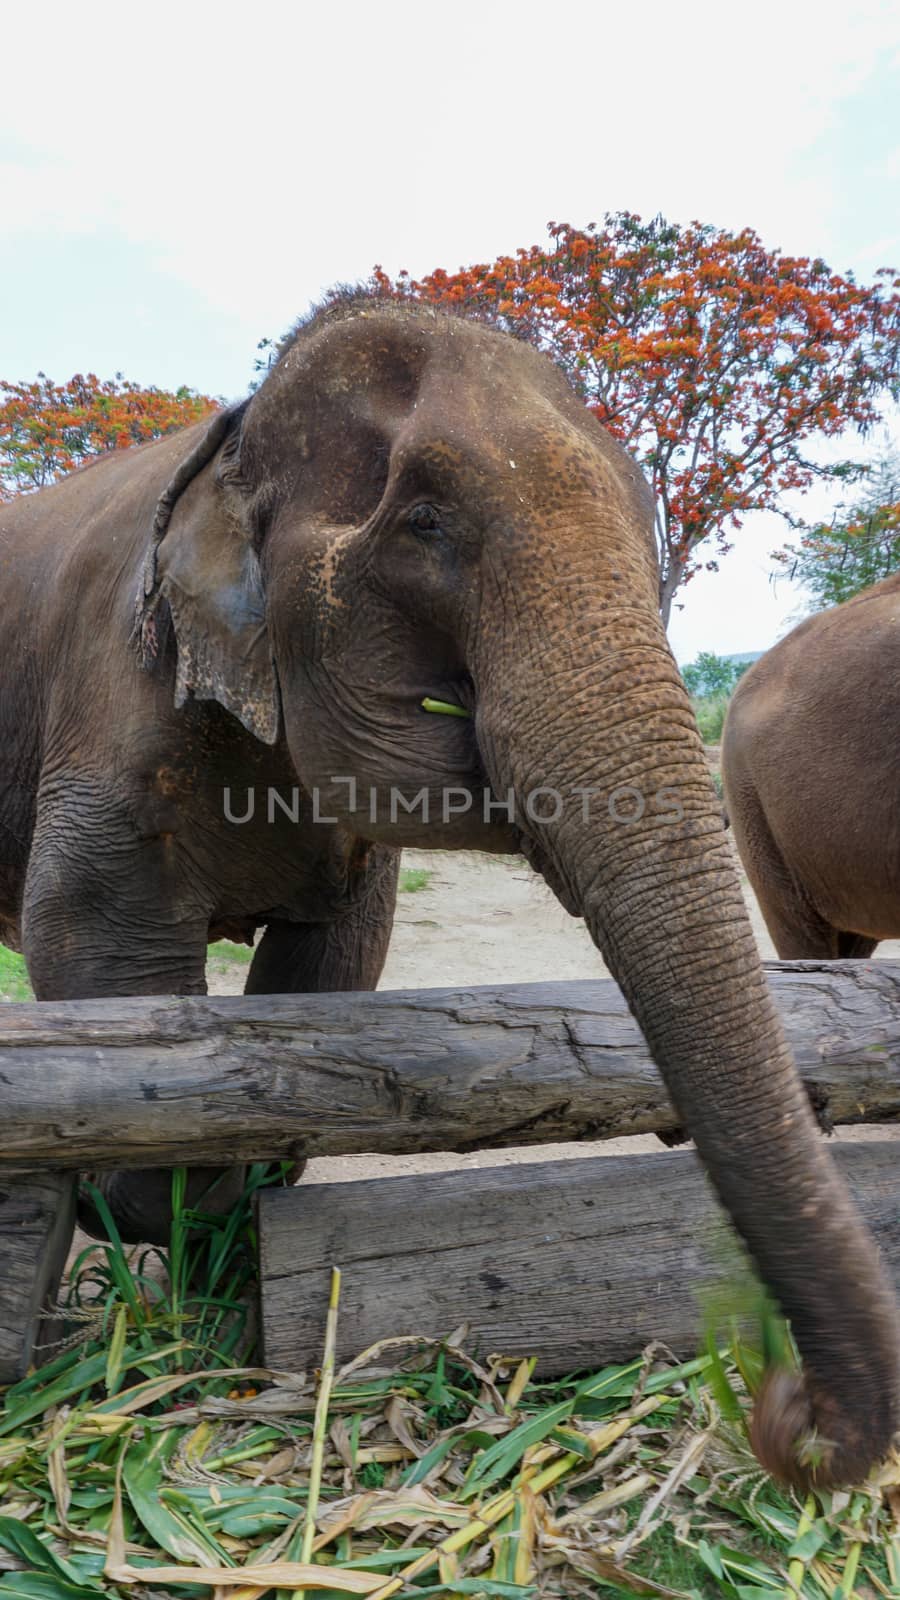 Close up of Elephants trunk while they are feeding on sugar cane and bamboo in Elephant Care Sanctuary, Mae Tang, Chiang Mai province, Thailand.